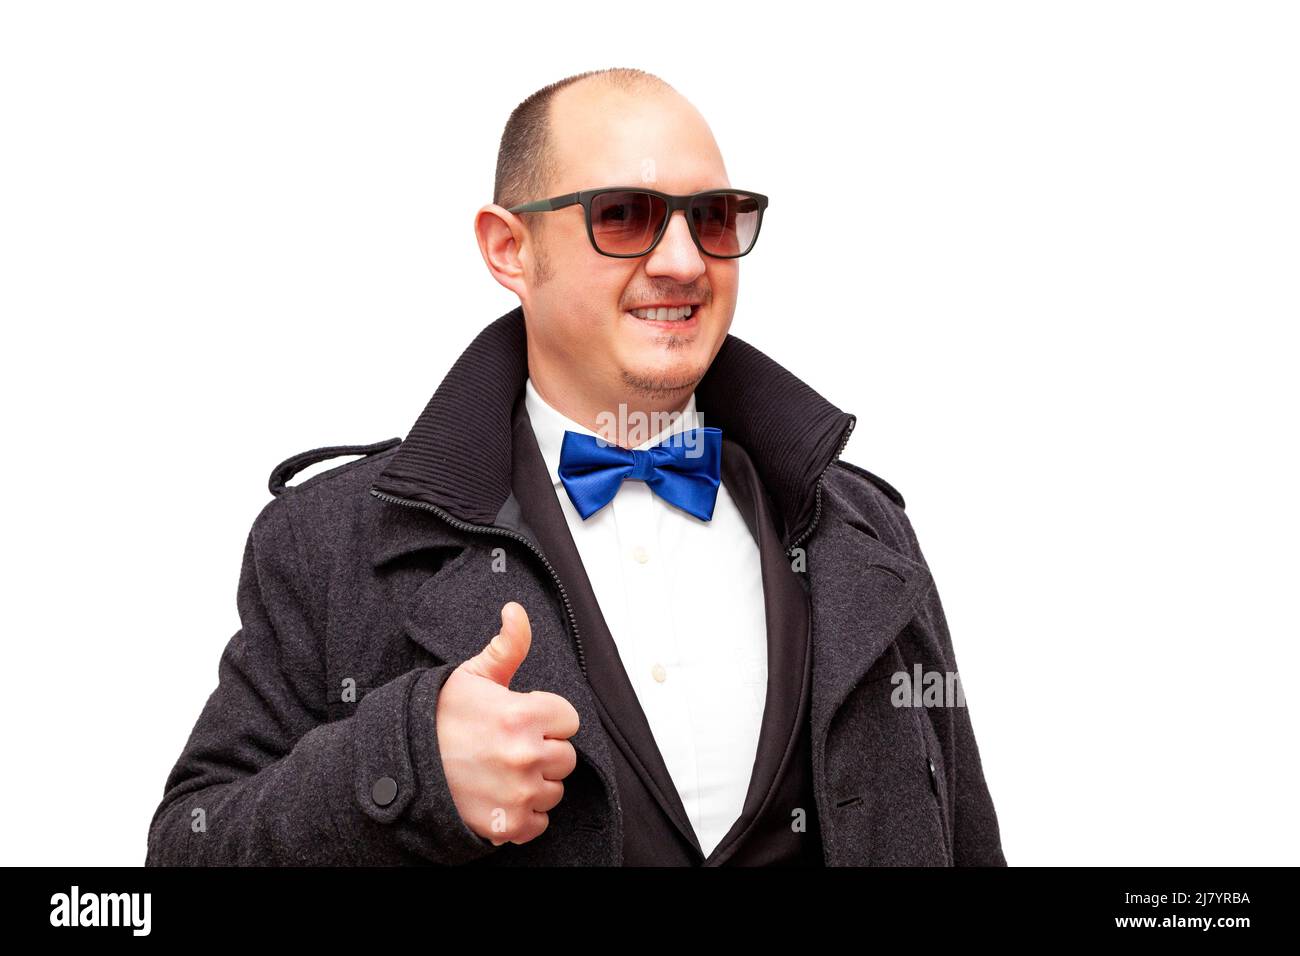 A bald adult man wearing sunglasses and dressed in smart clothes and a blue bow tie is holding up one of his thumbs while smiling. The male is on a wh Stock Photo